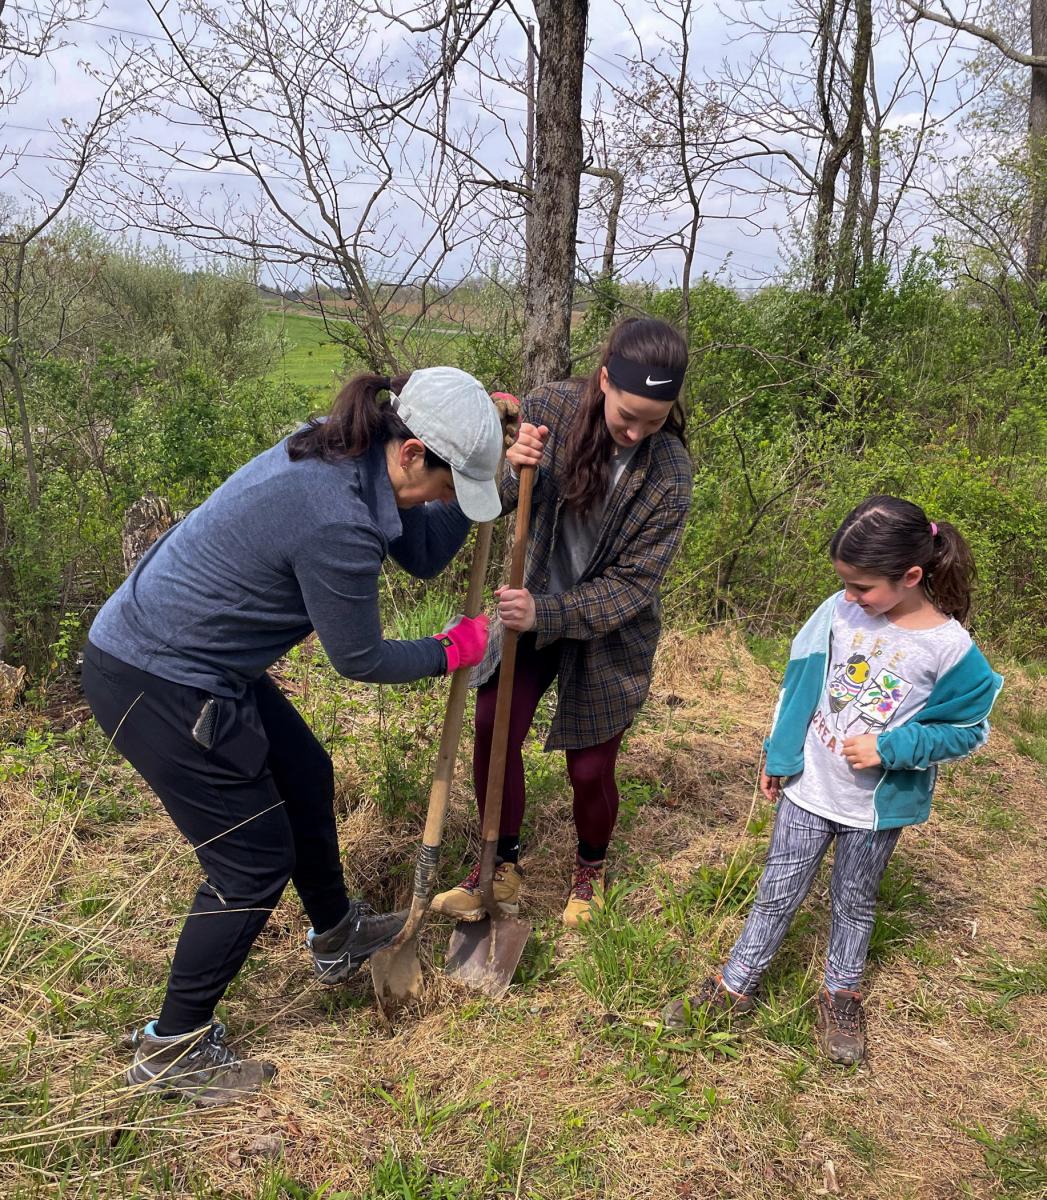 Ziva supervises the two-shovel technique of her mother (left) and Dariychuk.